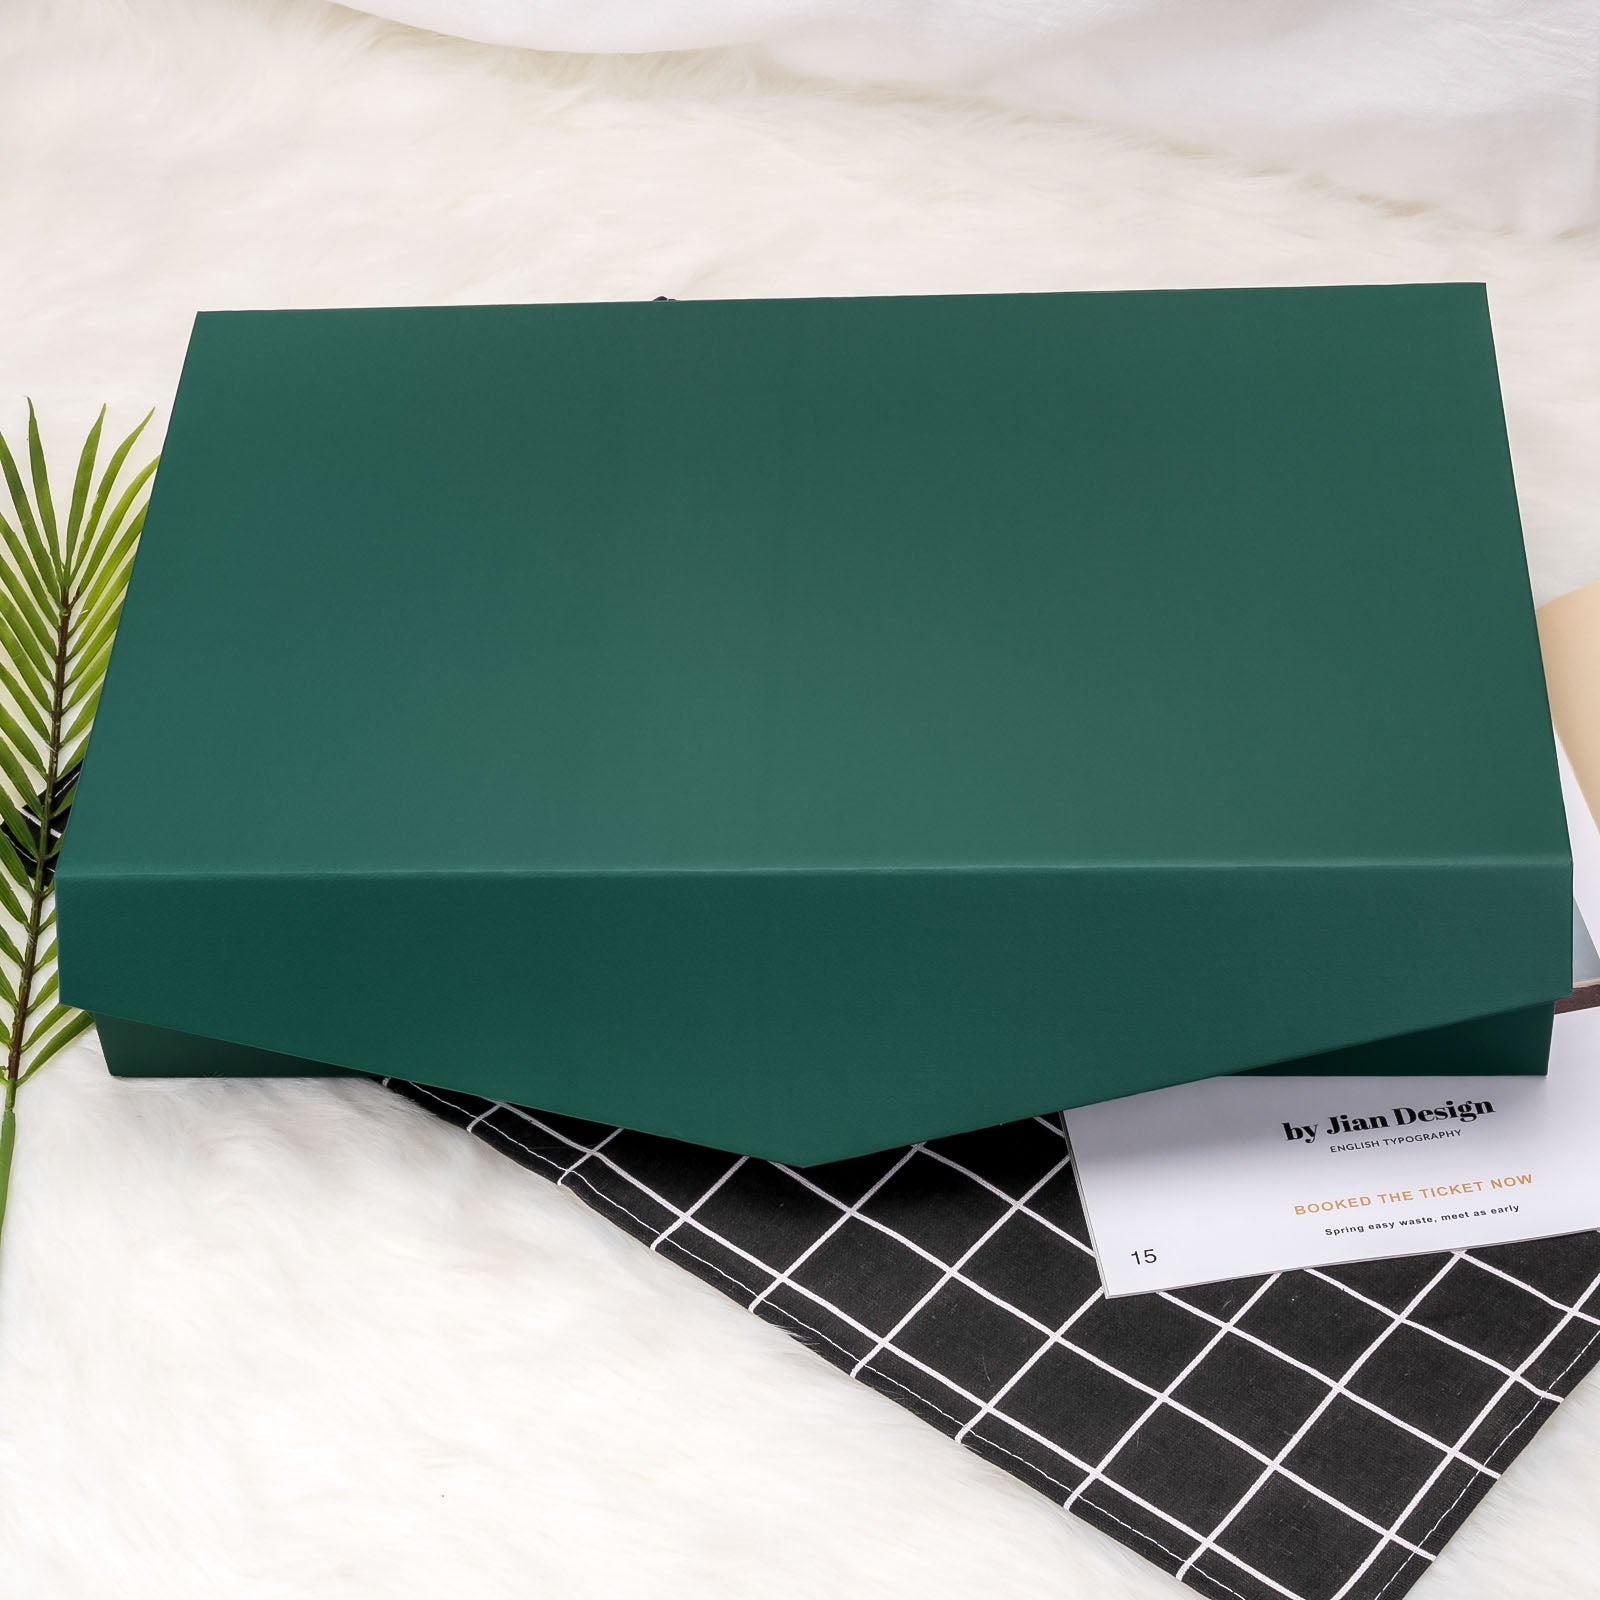 18.9x11.8x3.9inch Collapsible Gift Box with Magnetic Closure